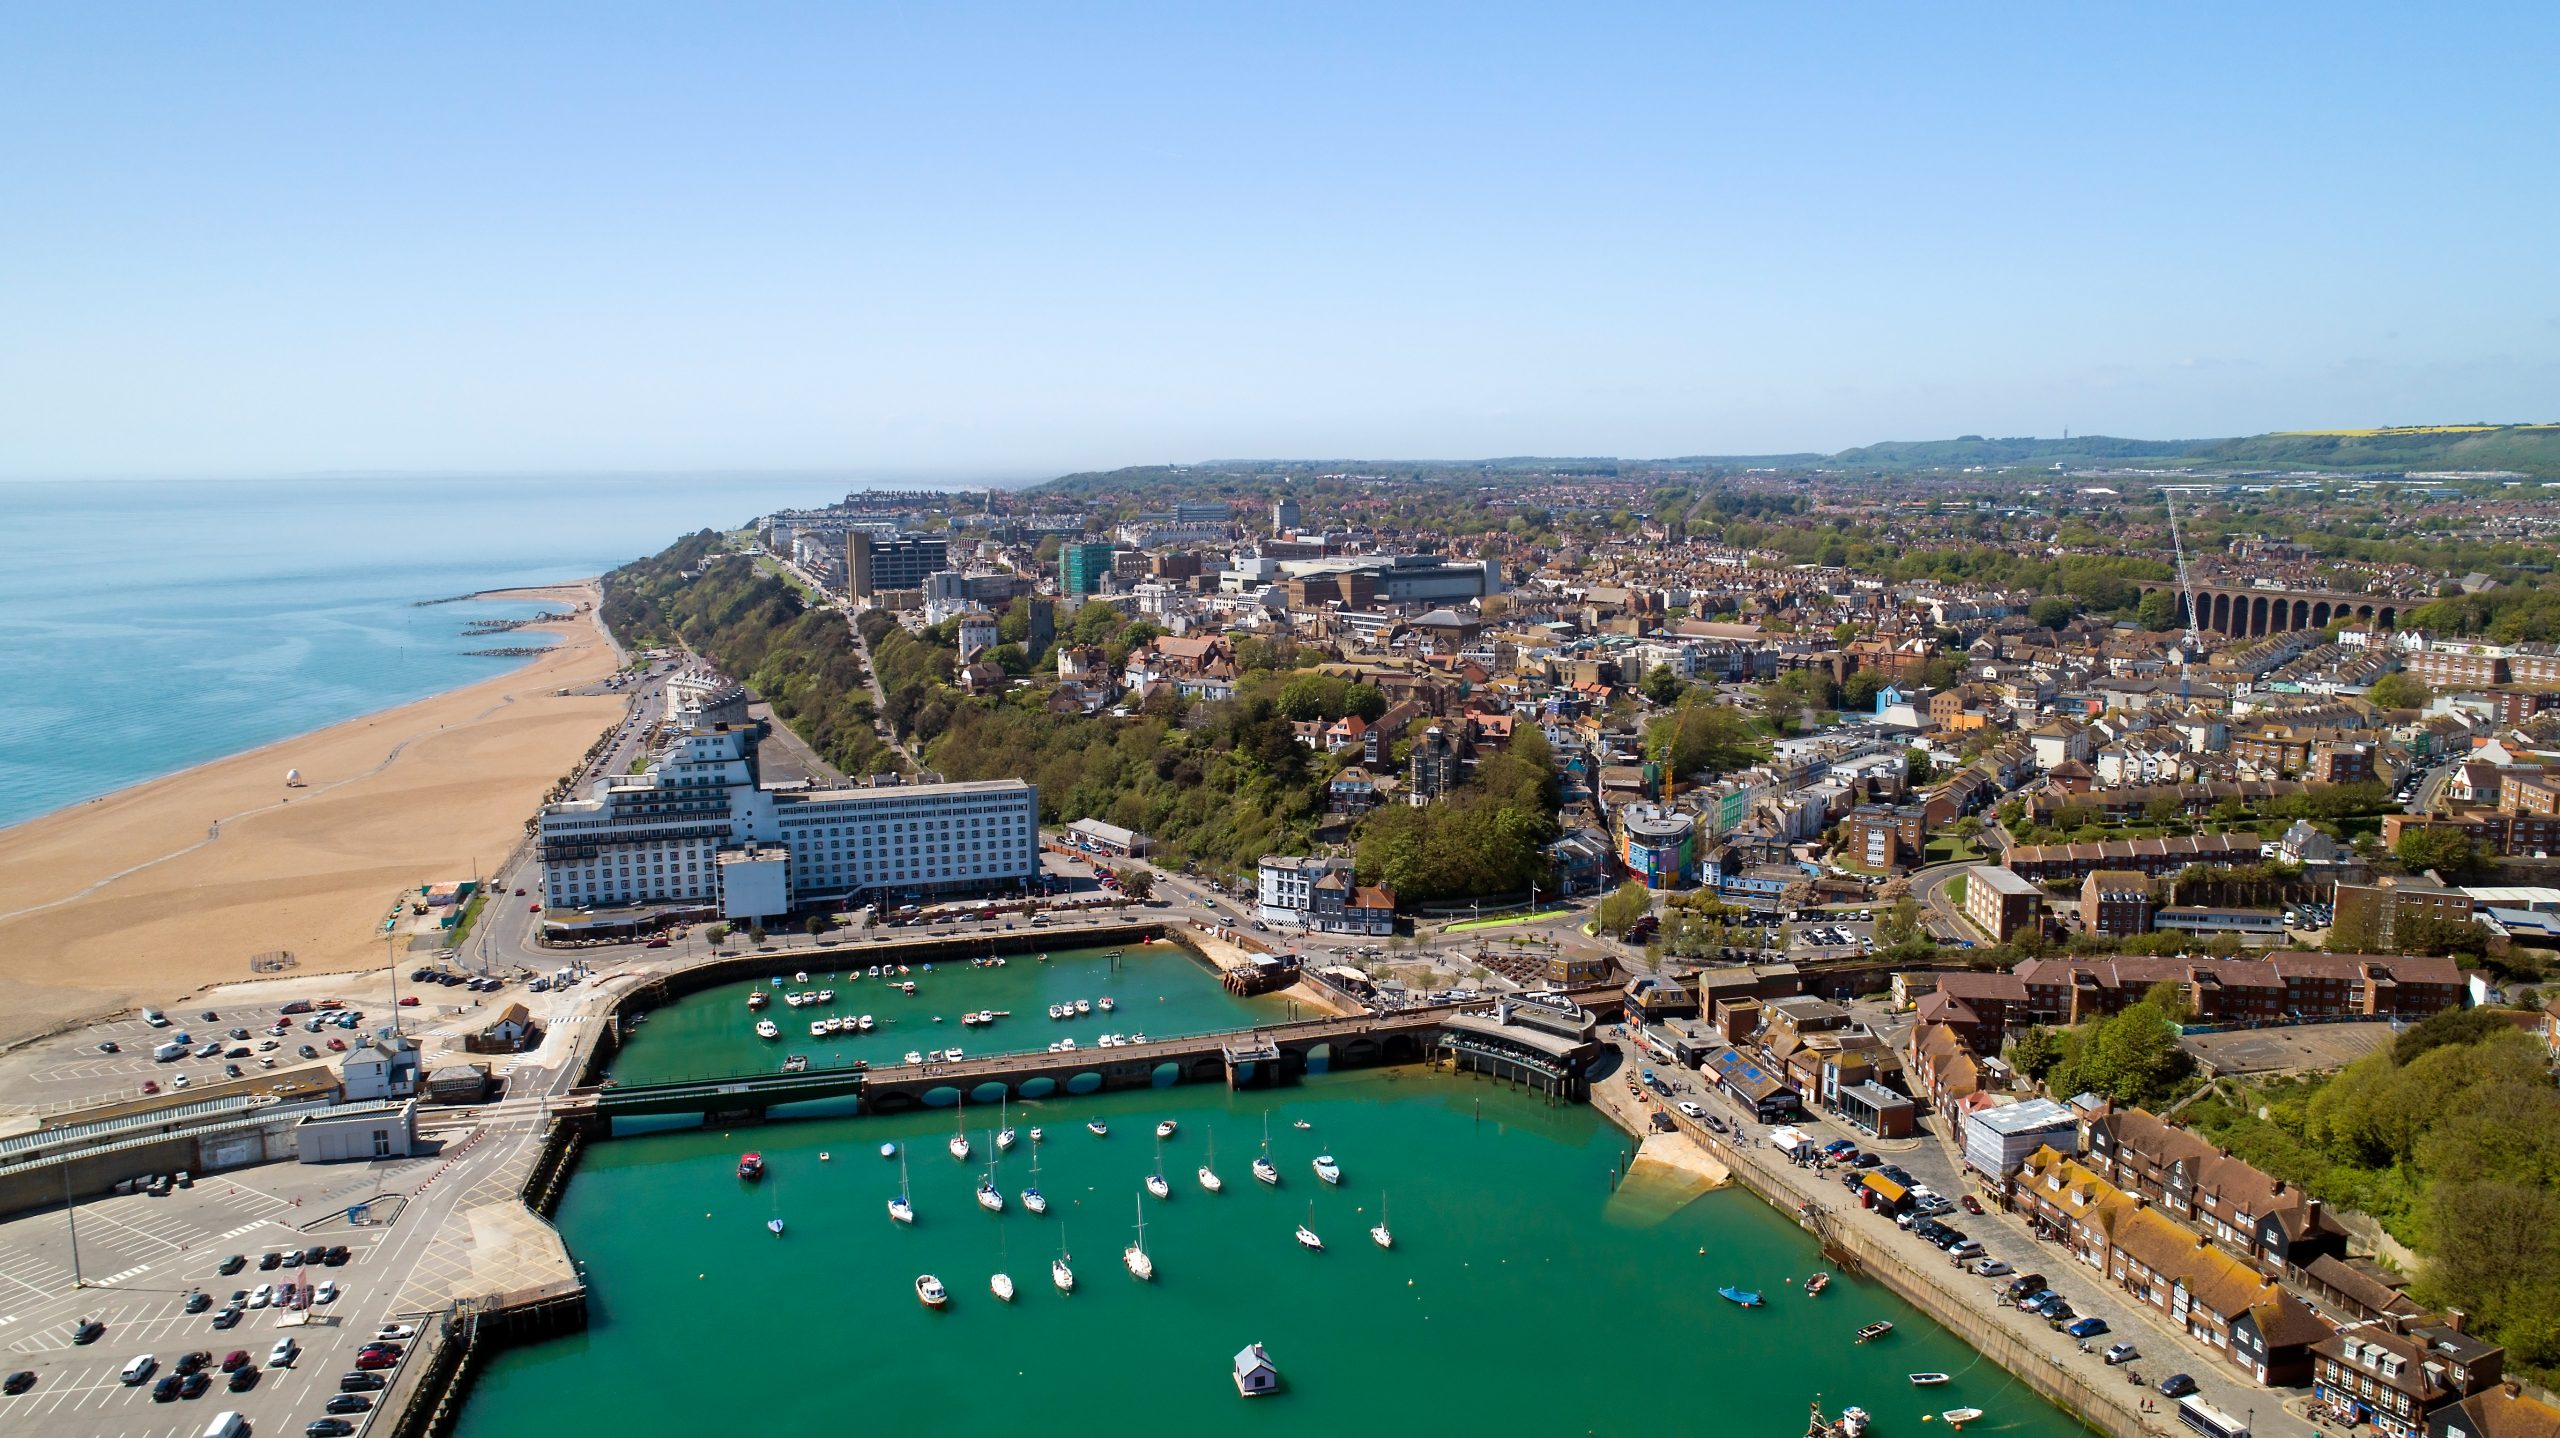 Folkestone named among UK’s top up and coming seaside towns